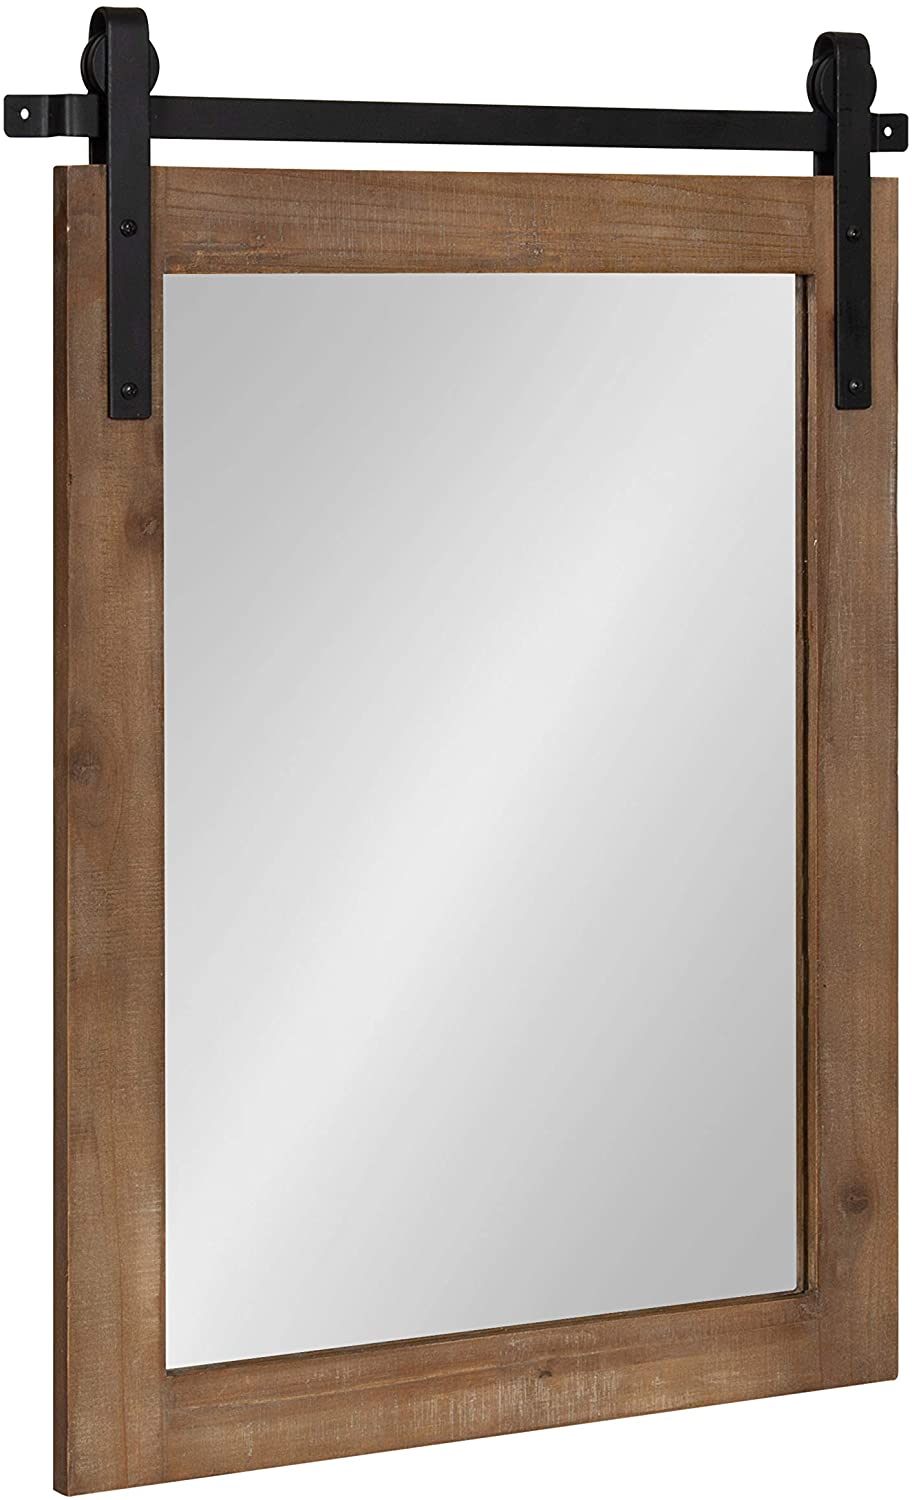 Kate and Laurel Rustic Brown Wall Mirror, 18×26-Inch